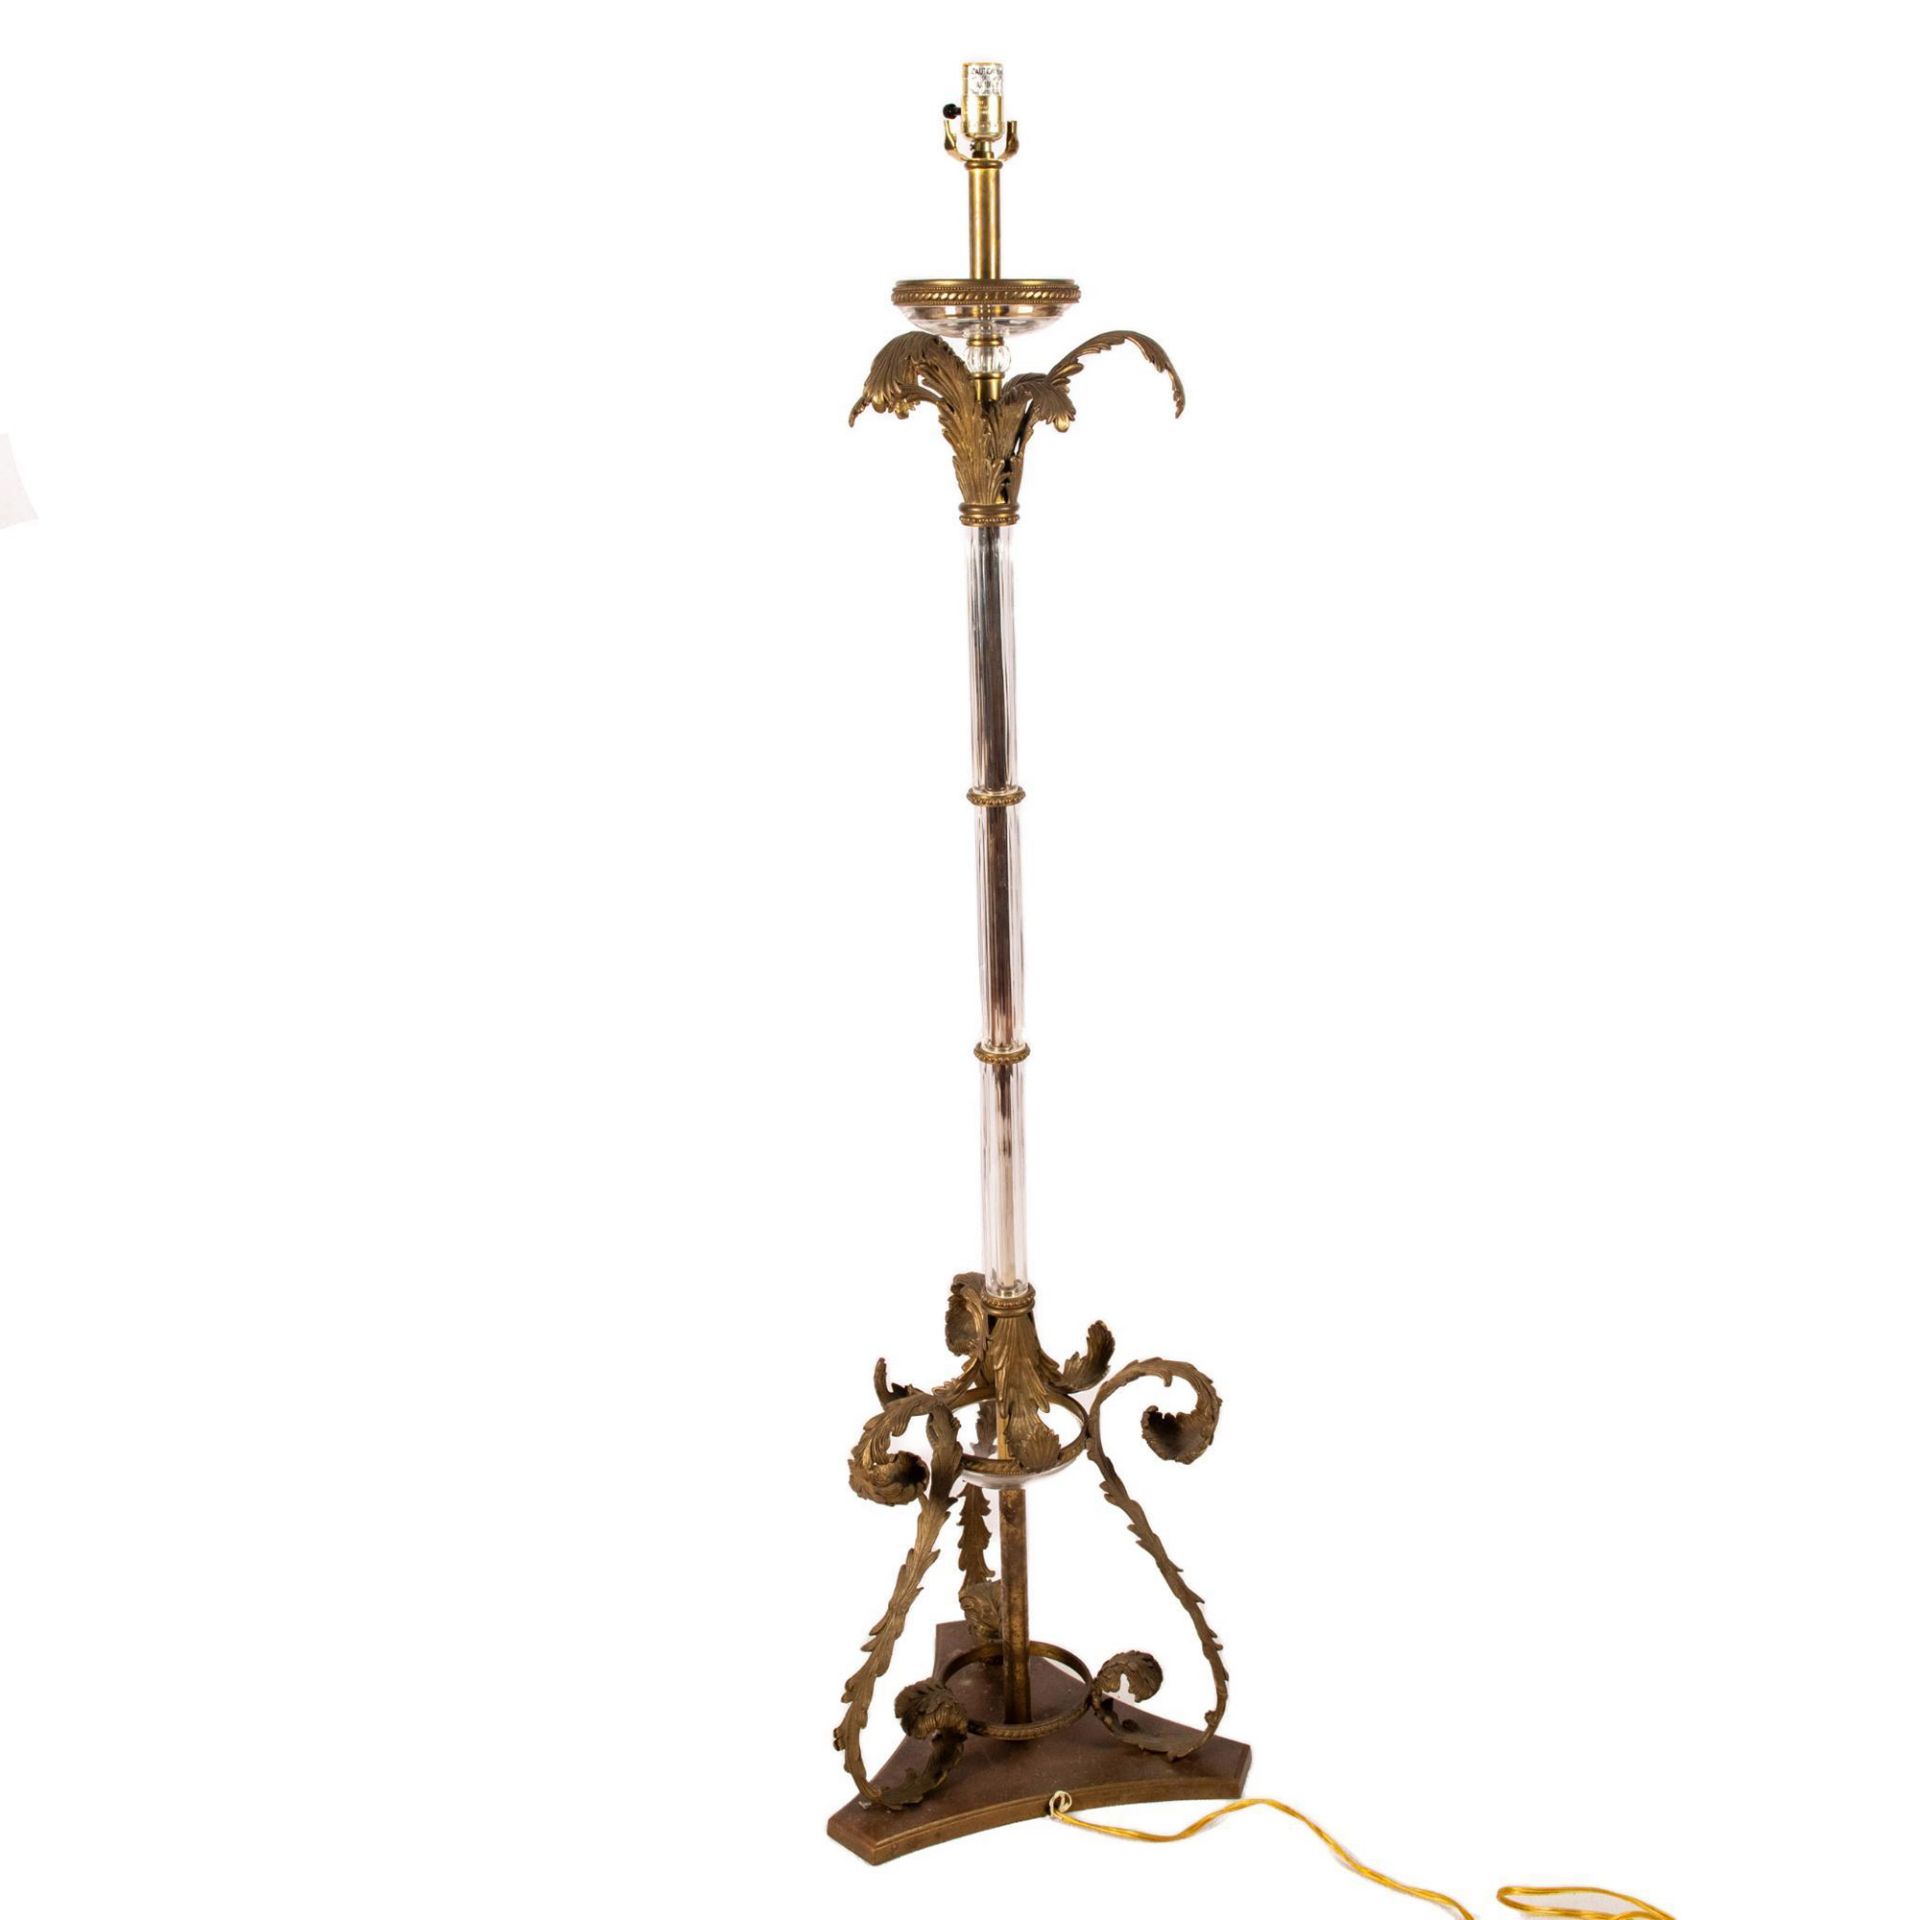 Baroque Style Brass and Glass Ornate Floor Lamp - Image 4 of 9